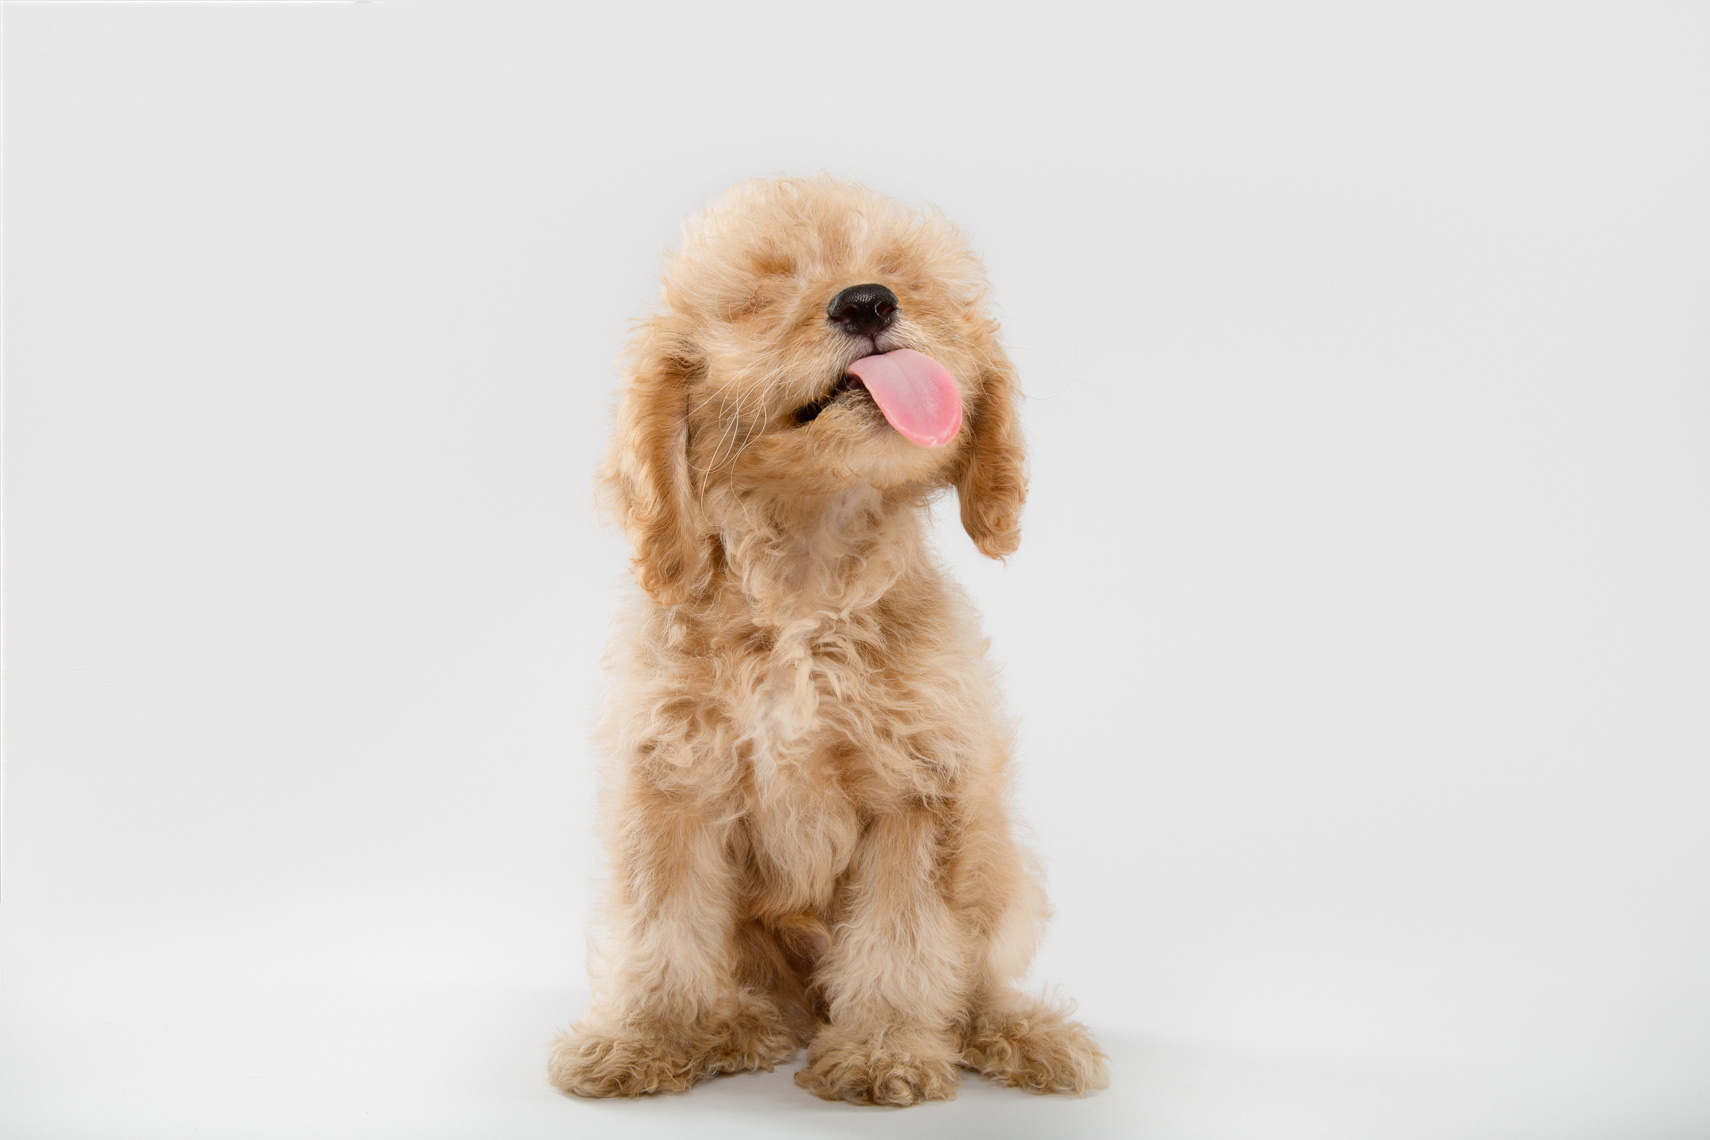 Cute goldendoodle puppy with his tongue sticking out at the camera